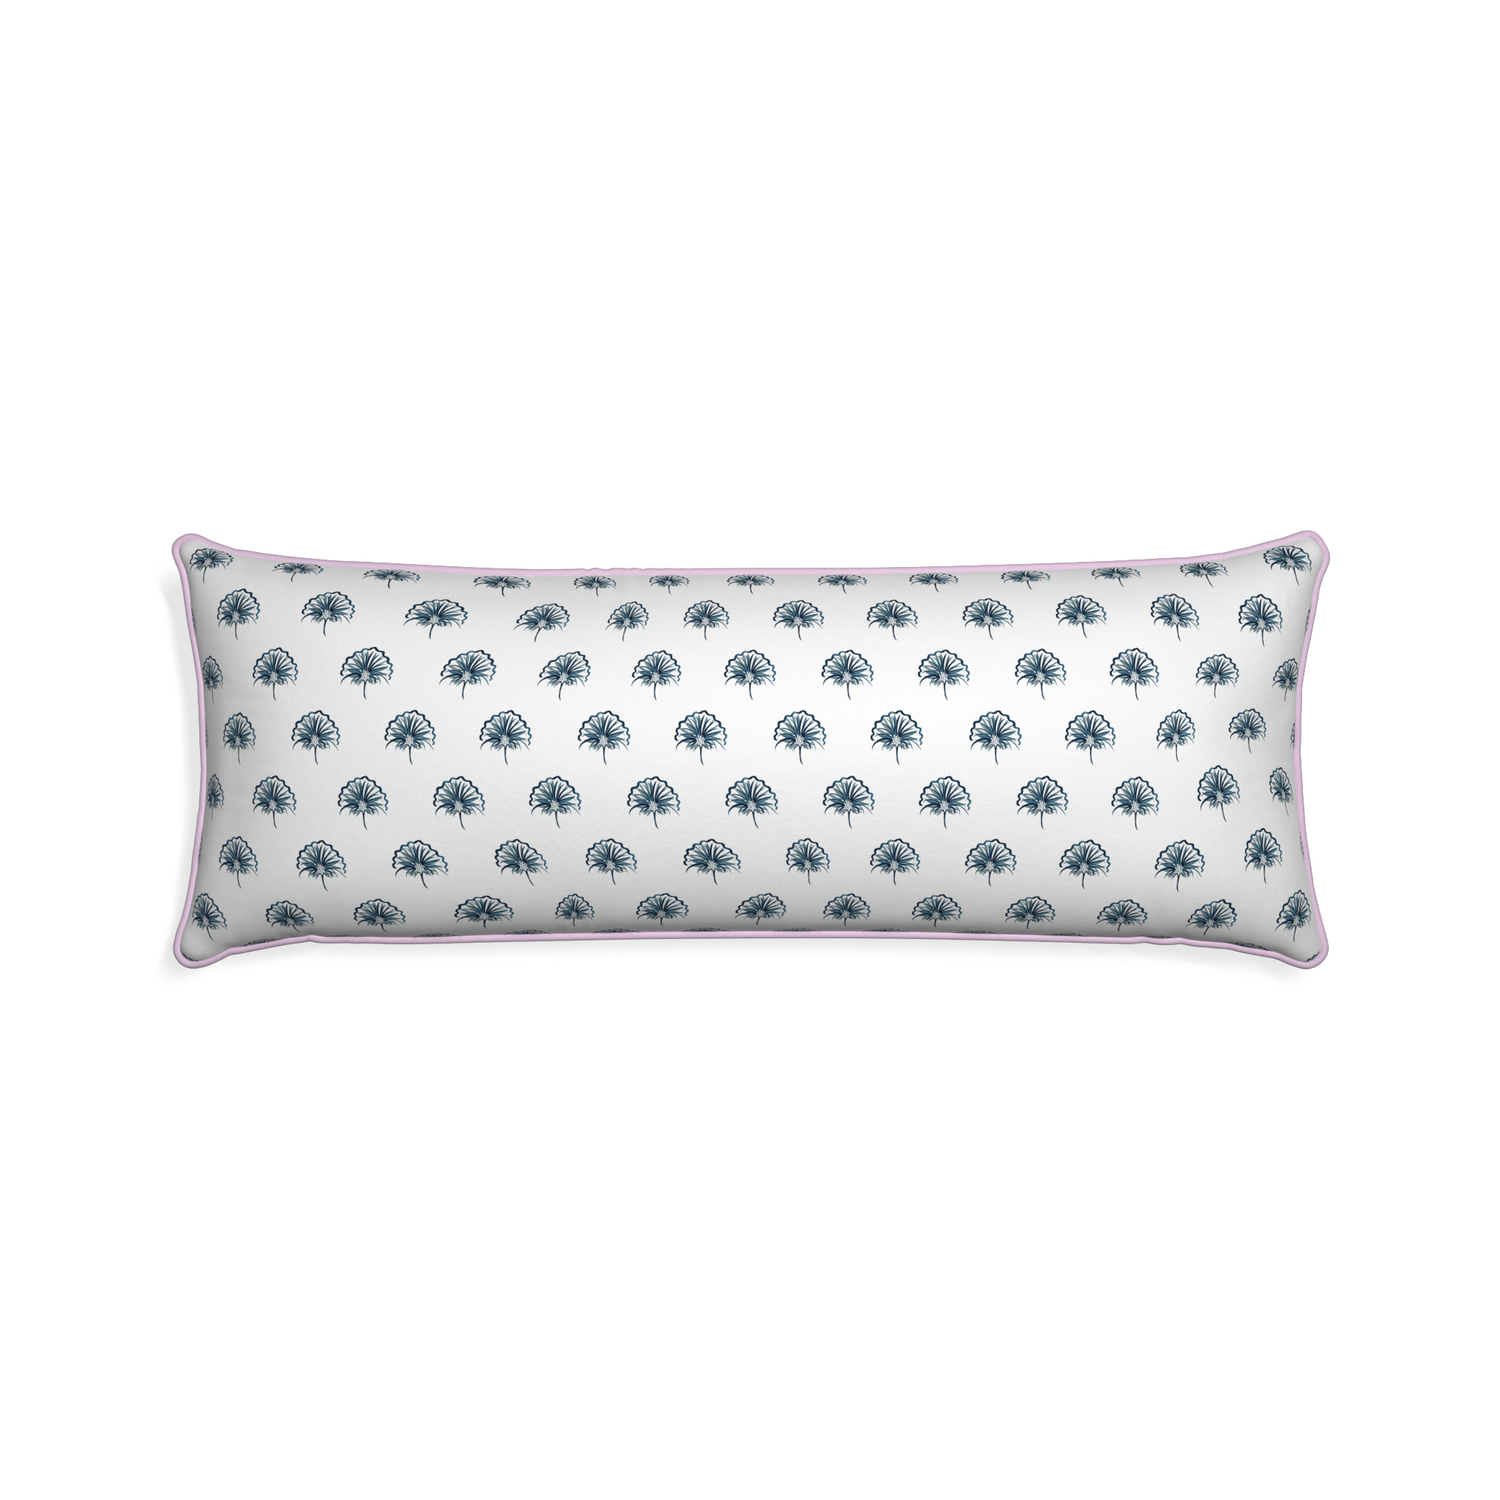 Xl-lumbar penelope midnight custom pillow with l piping on white background